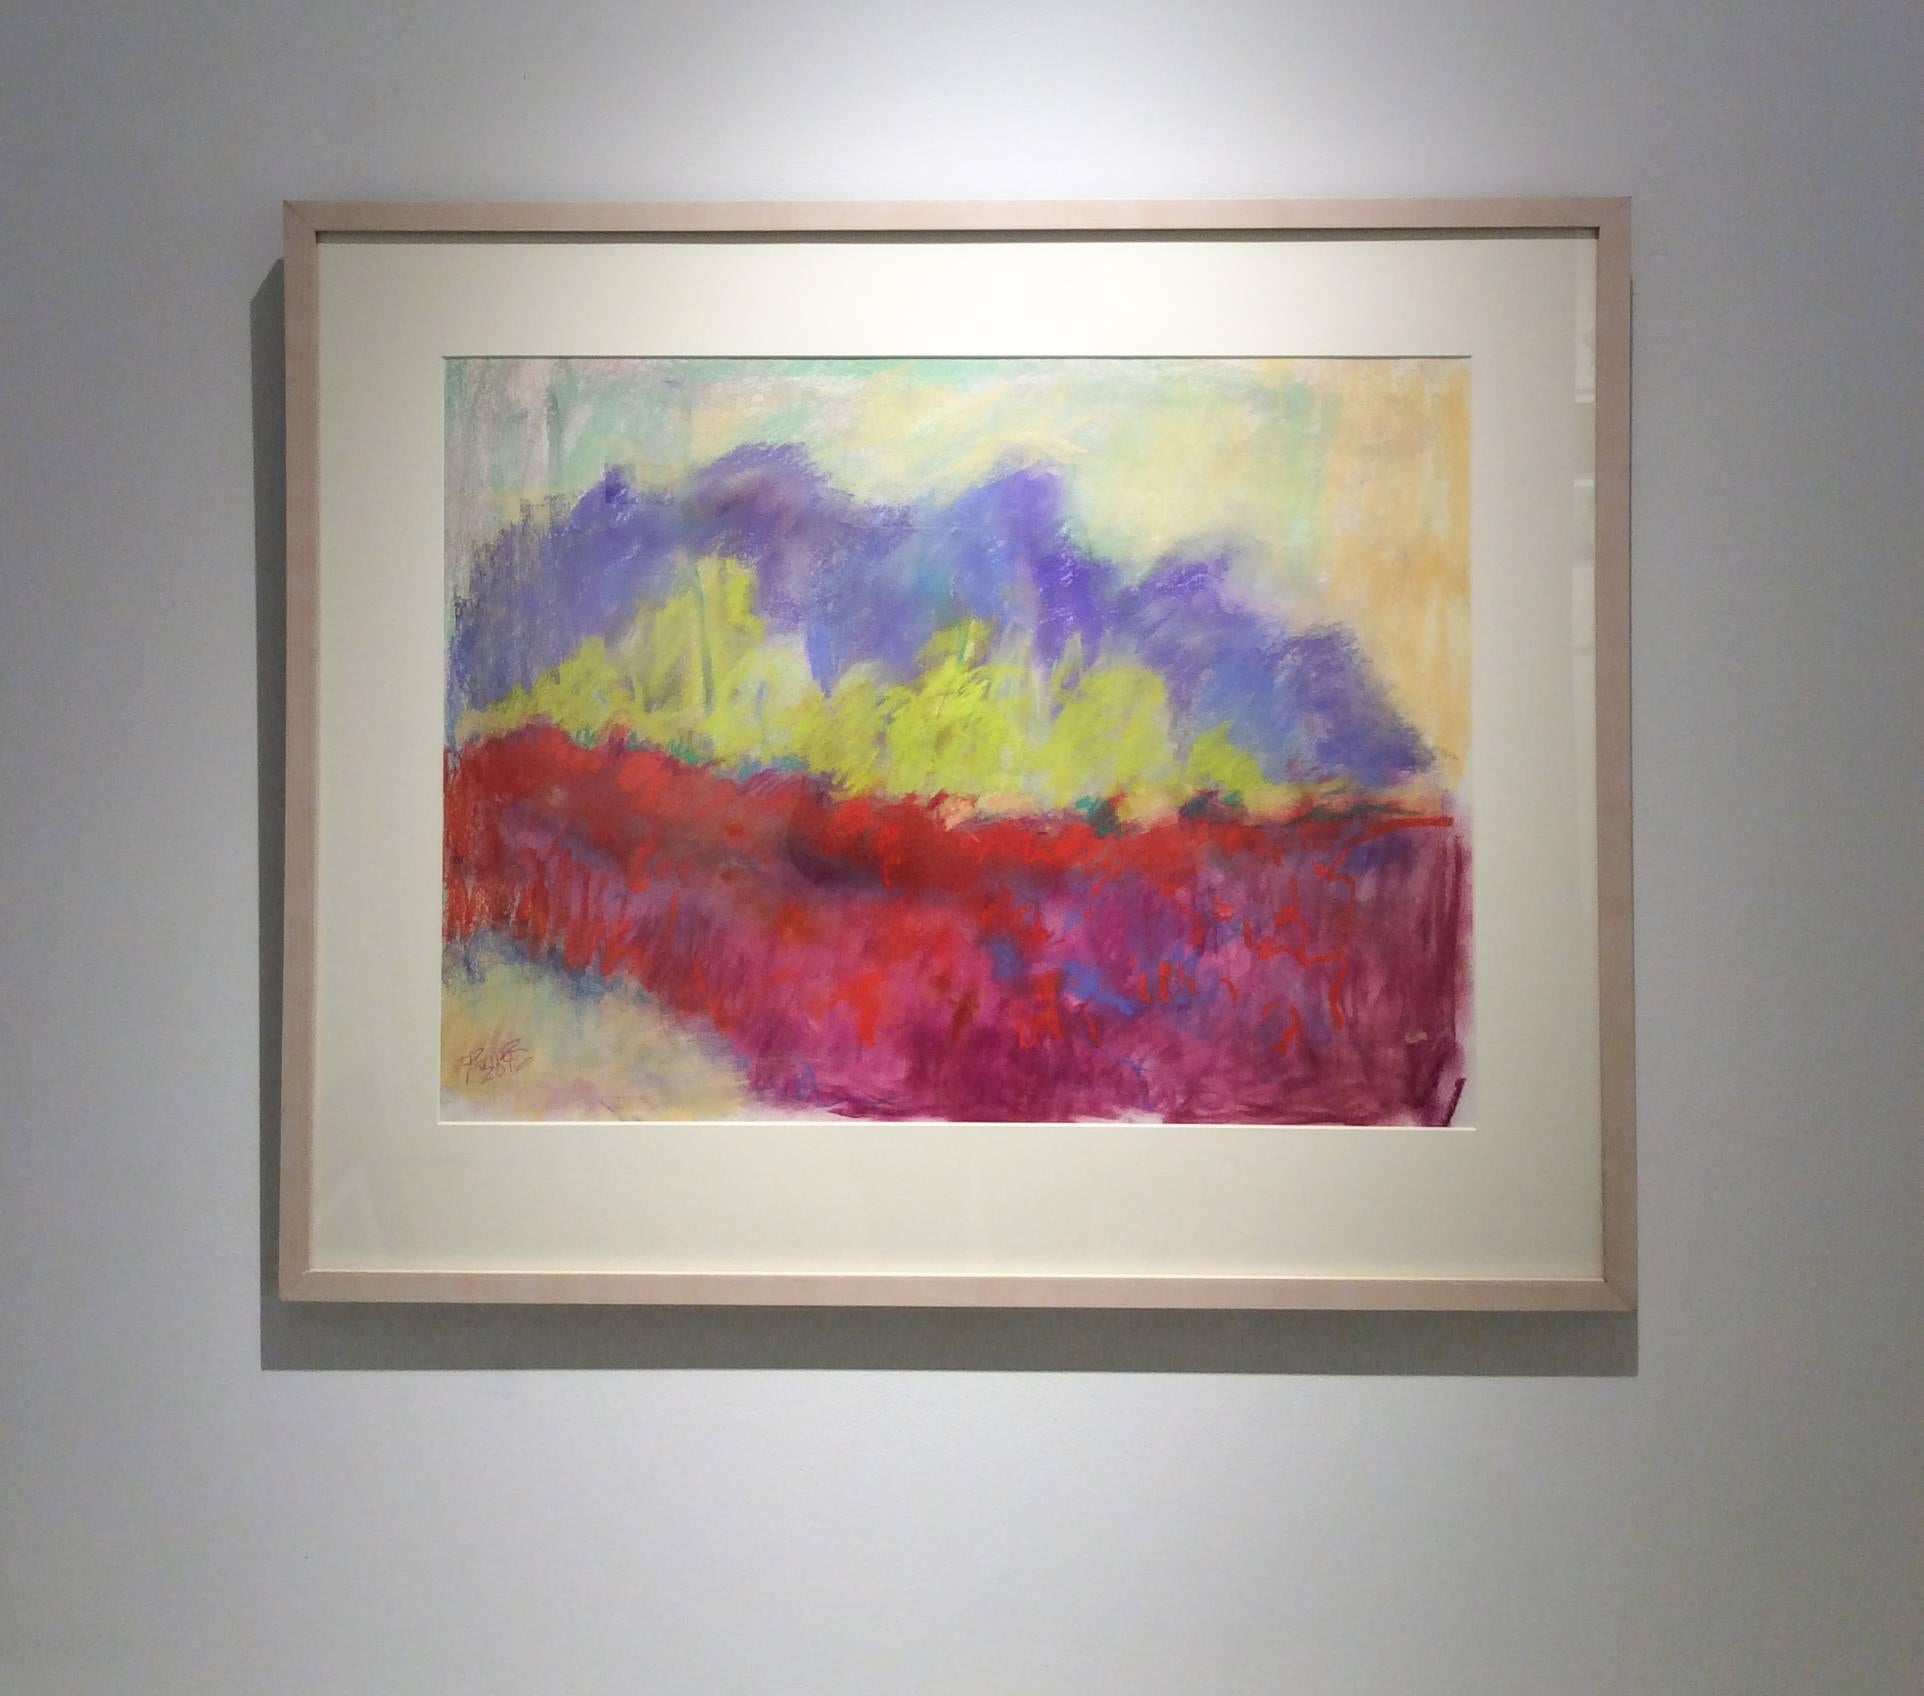 19 x 25 inches, pastel on archival paper
27 x 33 x 1.5 inches framed, custom white stained wooden frame with white mat and glass

This brilliantly colored abstract landscape pastel drawing on paper is inspired by the Red Clover Fields that are near